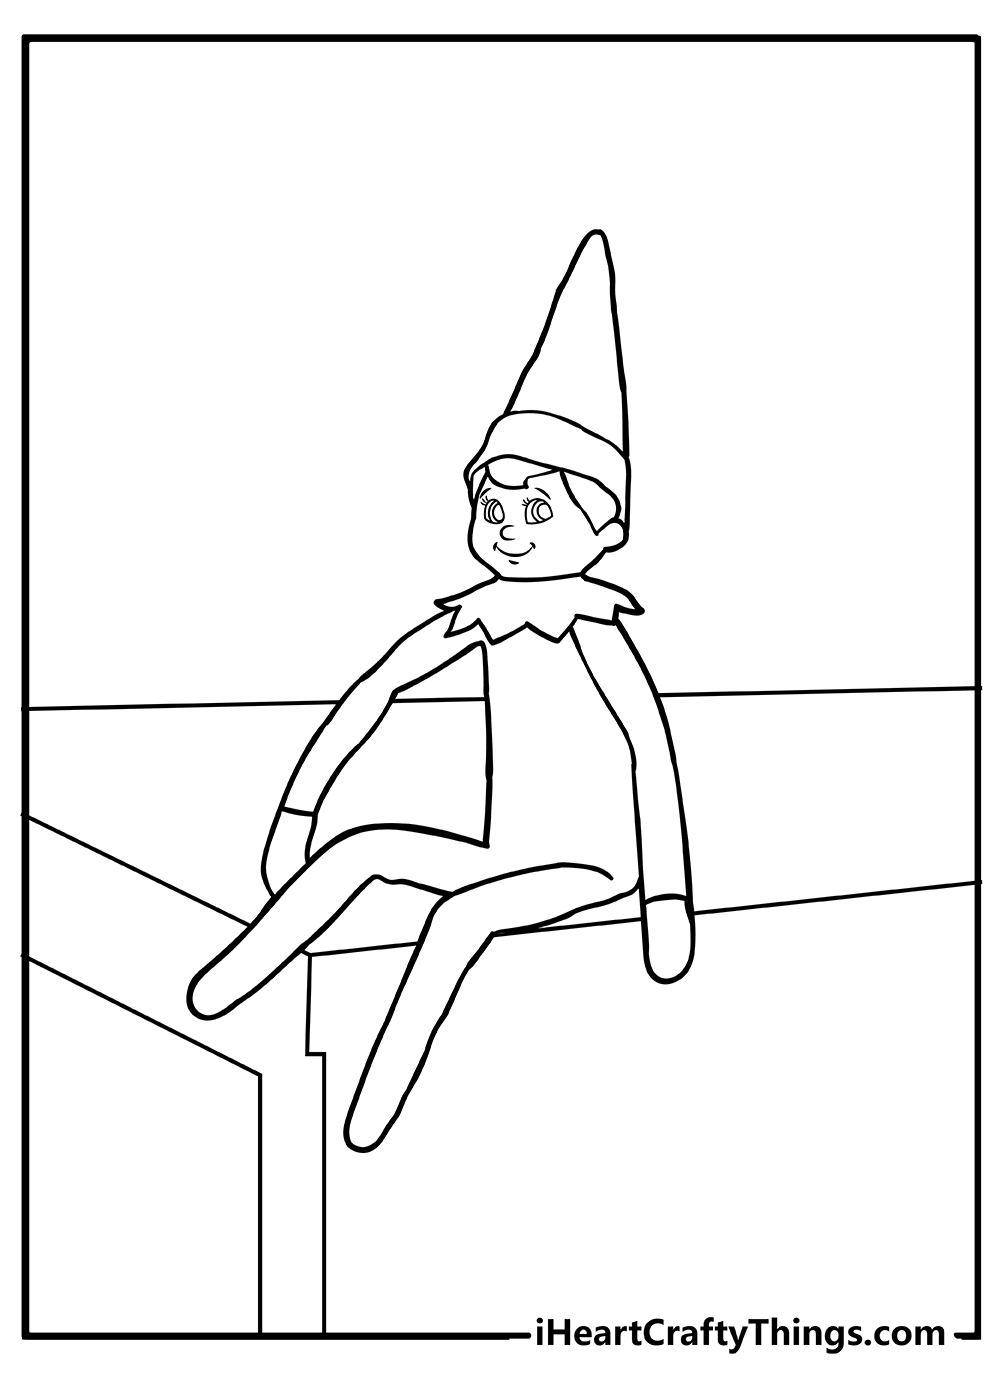 Elf on the Shelf Coloring Pages free download